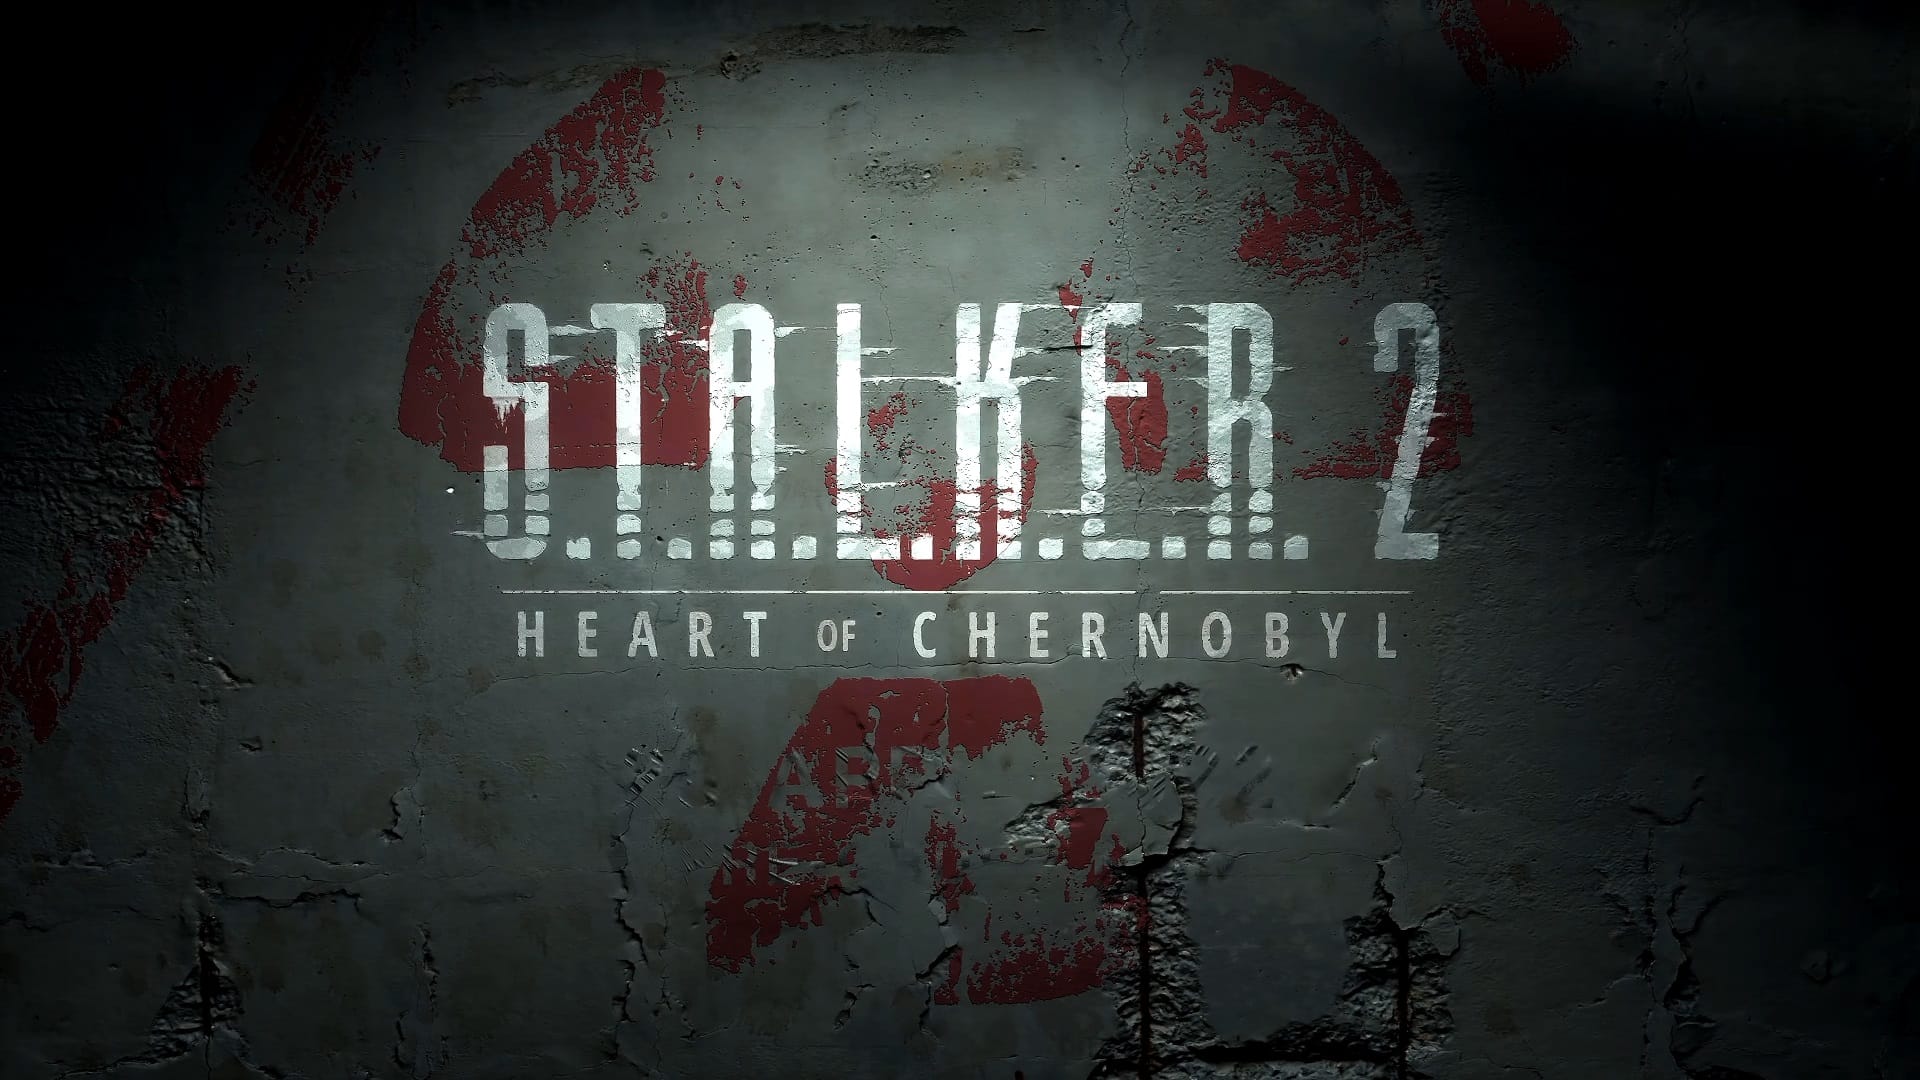 S.T.A.L.K.E.R. 2: Heart of Chornobyl Preview - Still Rough but